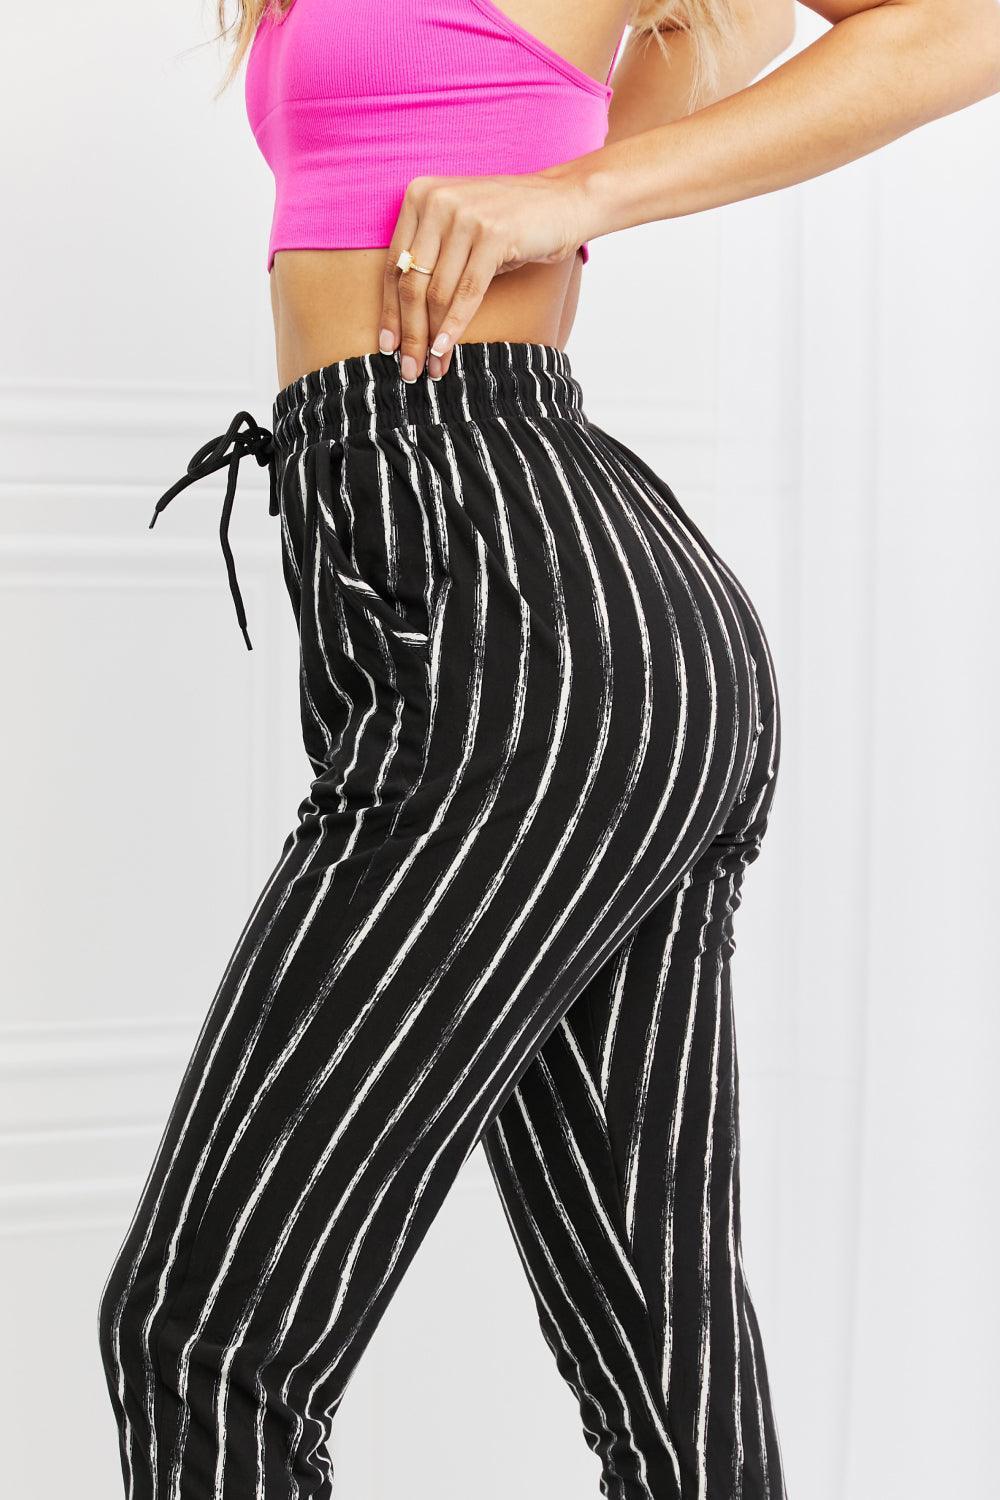 Day-To-Day Comfort Plus Size High Waisted Joggers - MXSTUDIO.COM